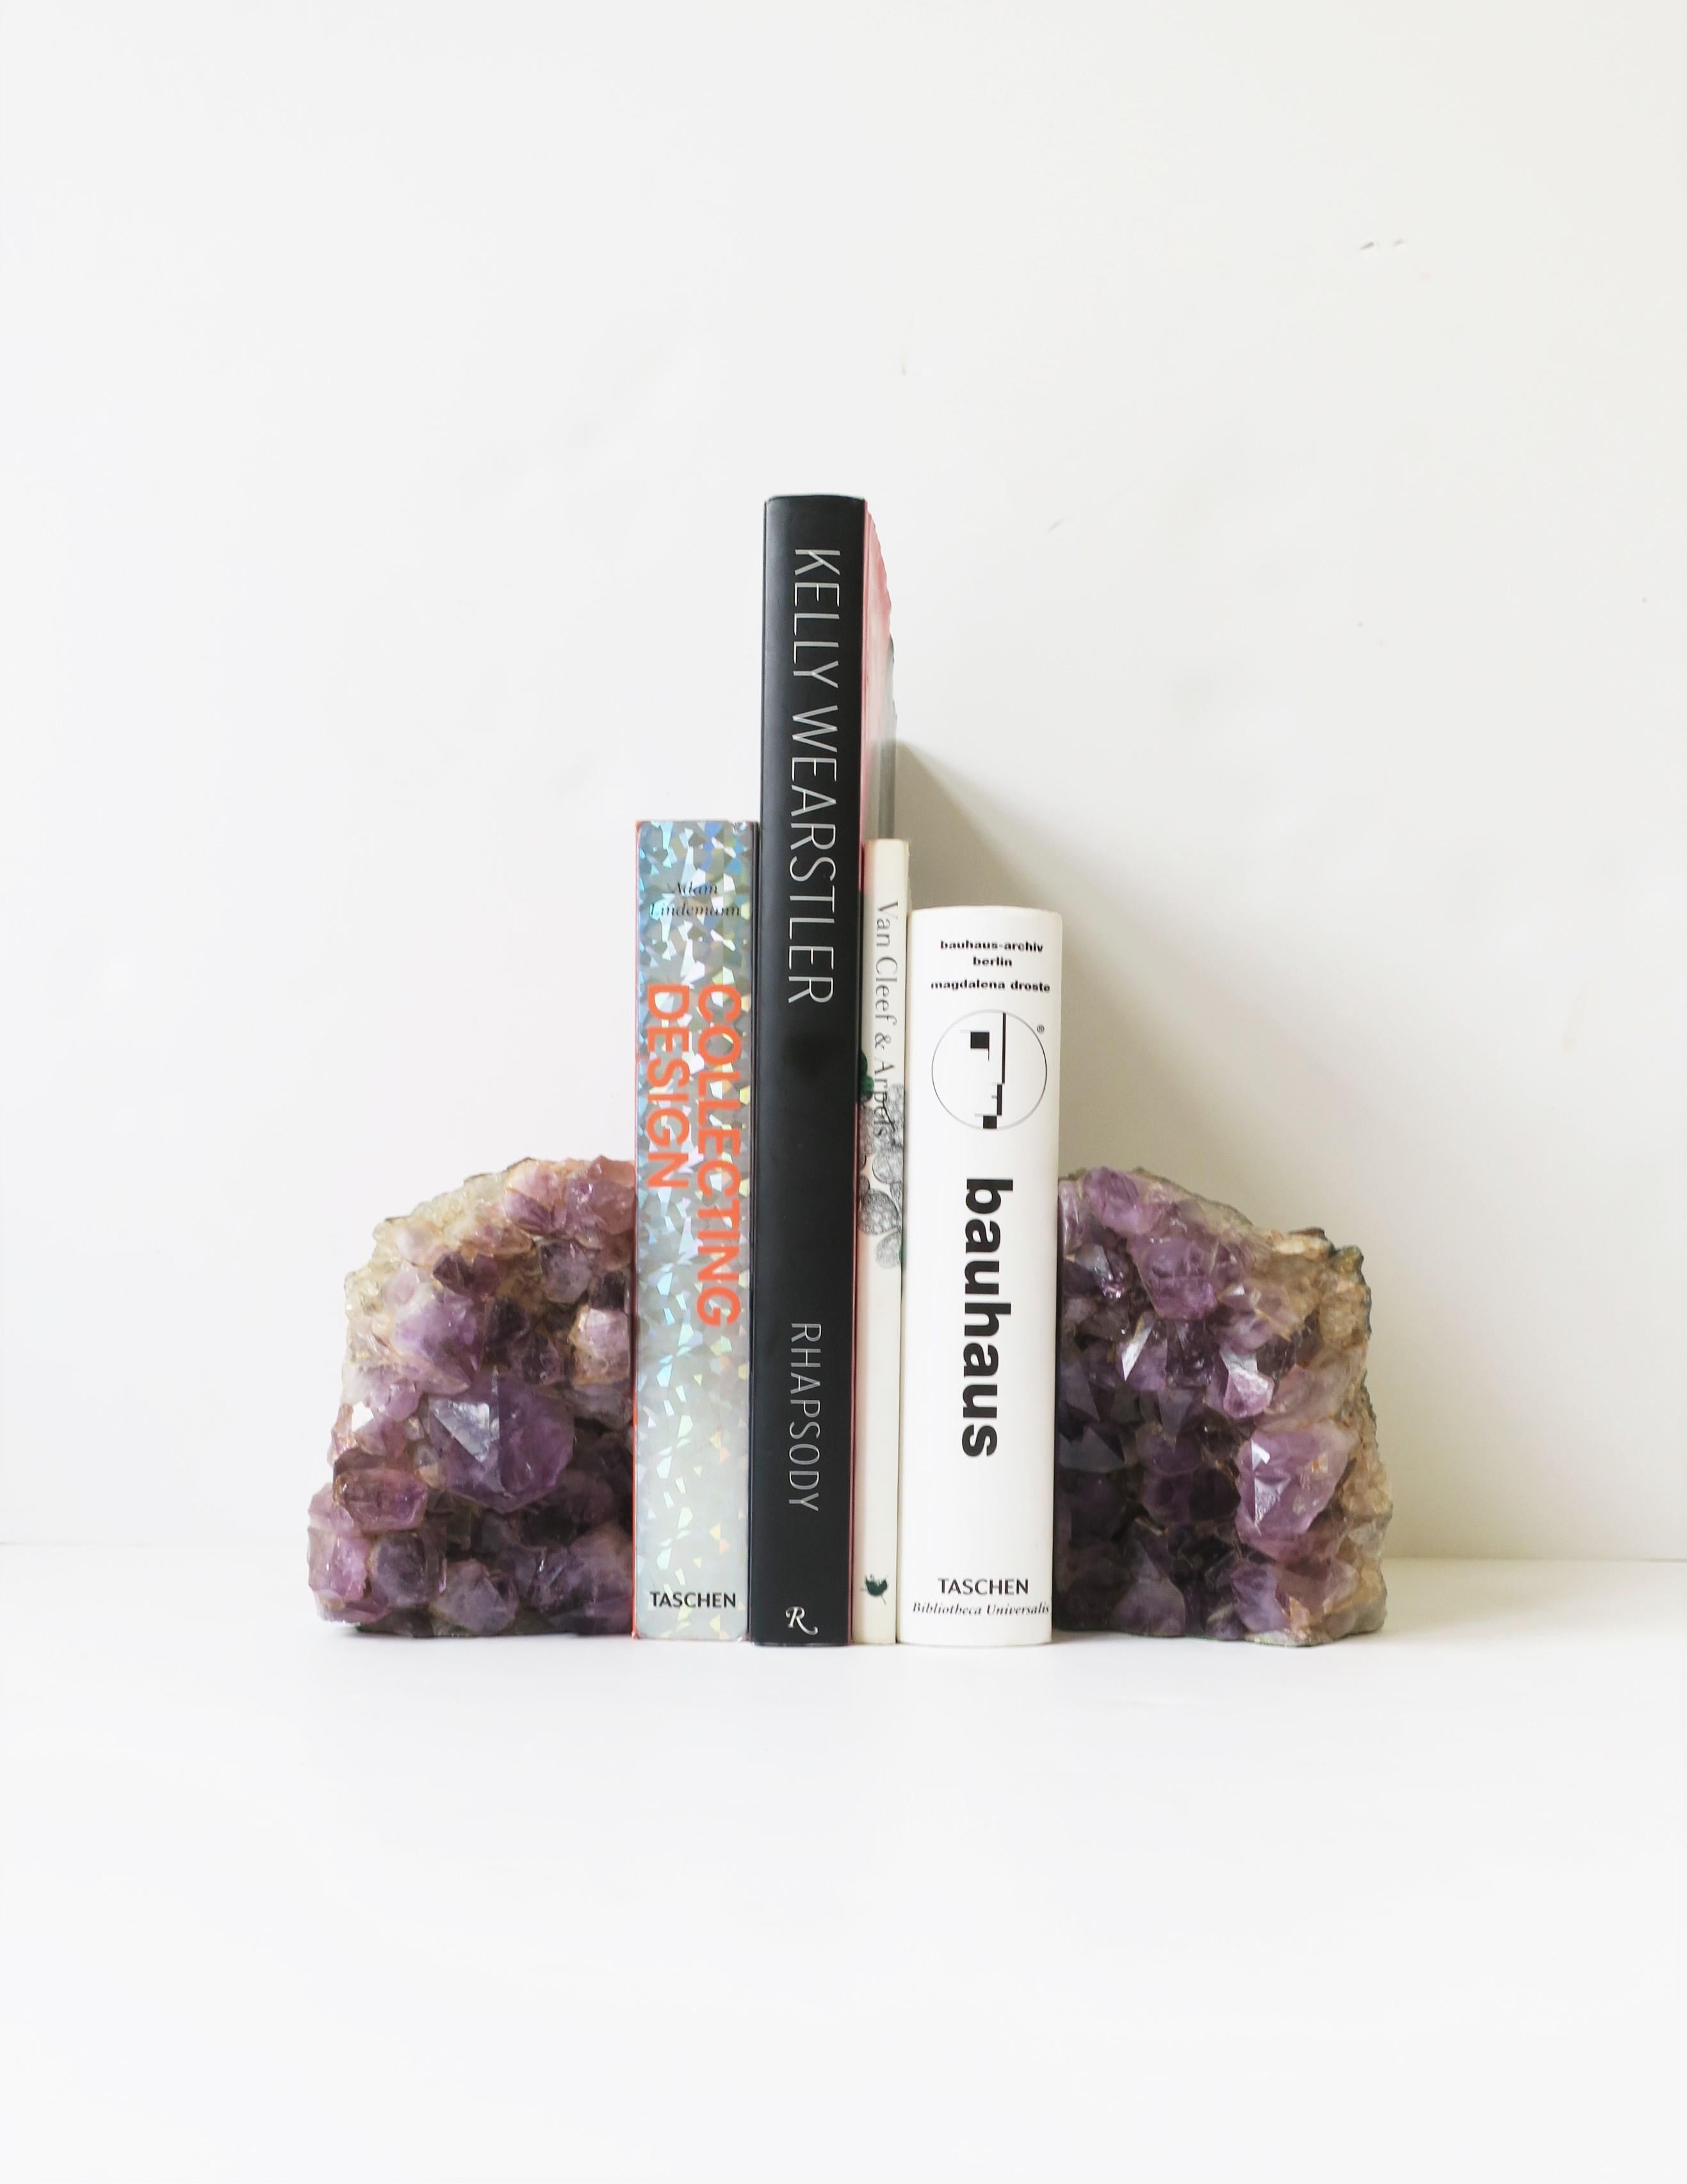 amethyst bookends